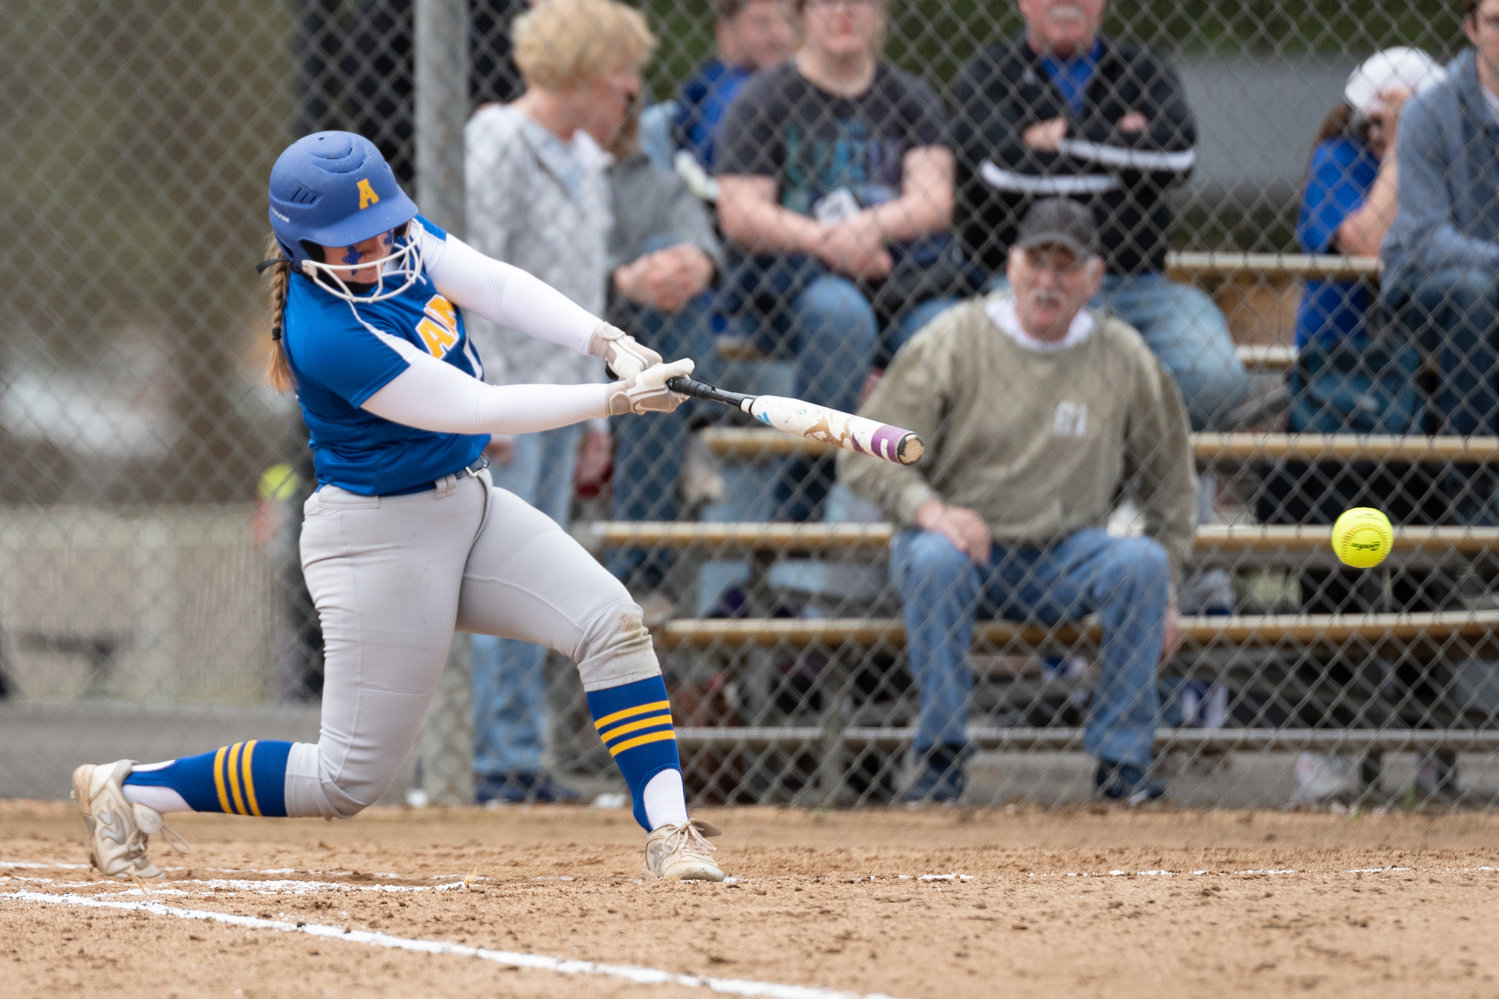 Adna's Ashlee VonMoos makes contact with a pitch against Toutle Lake in the 2B District 4 tournament at Fort Borst Park May 20.